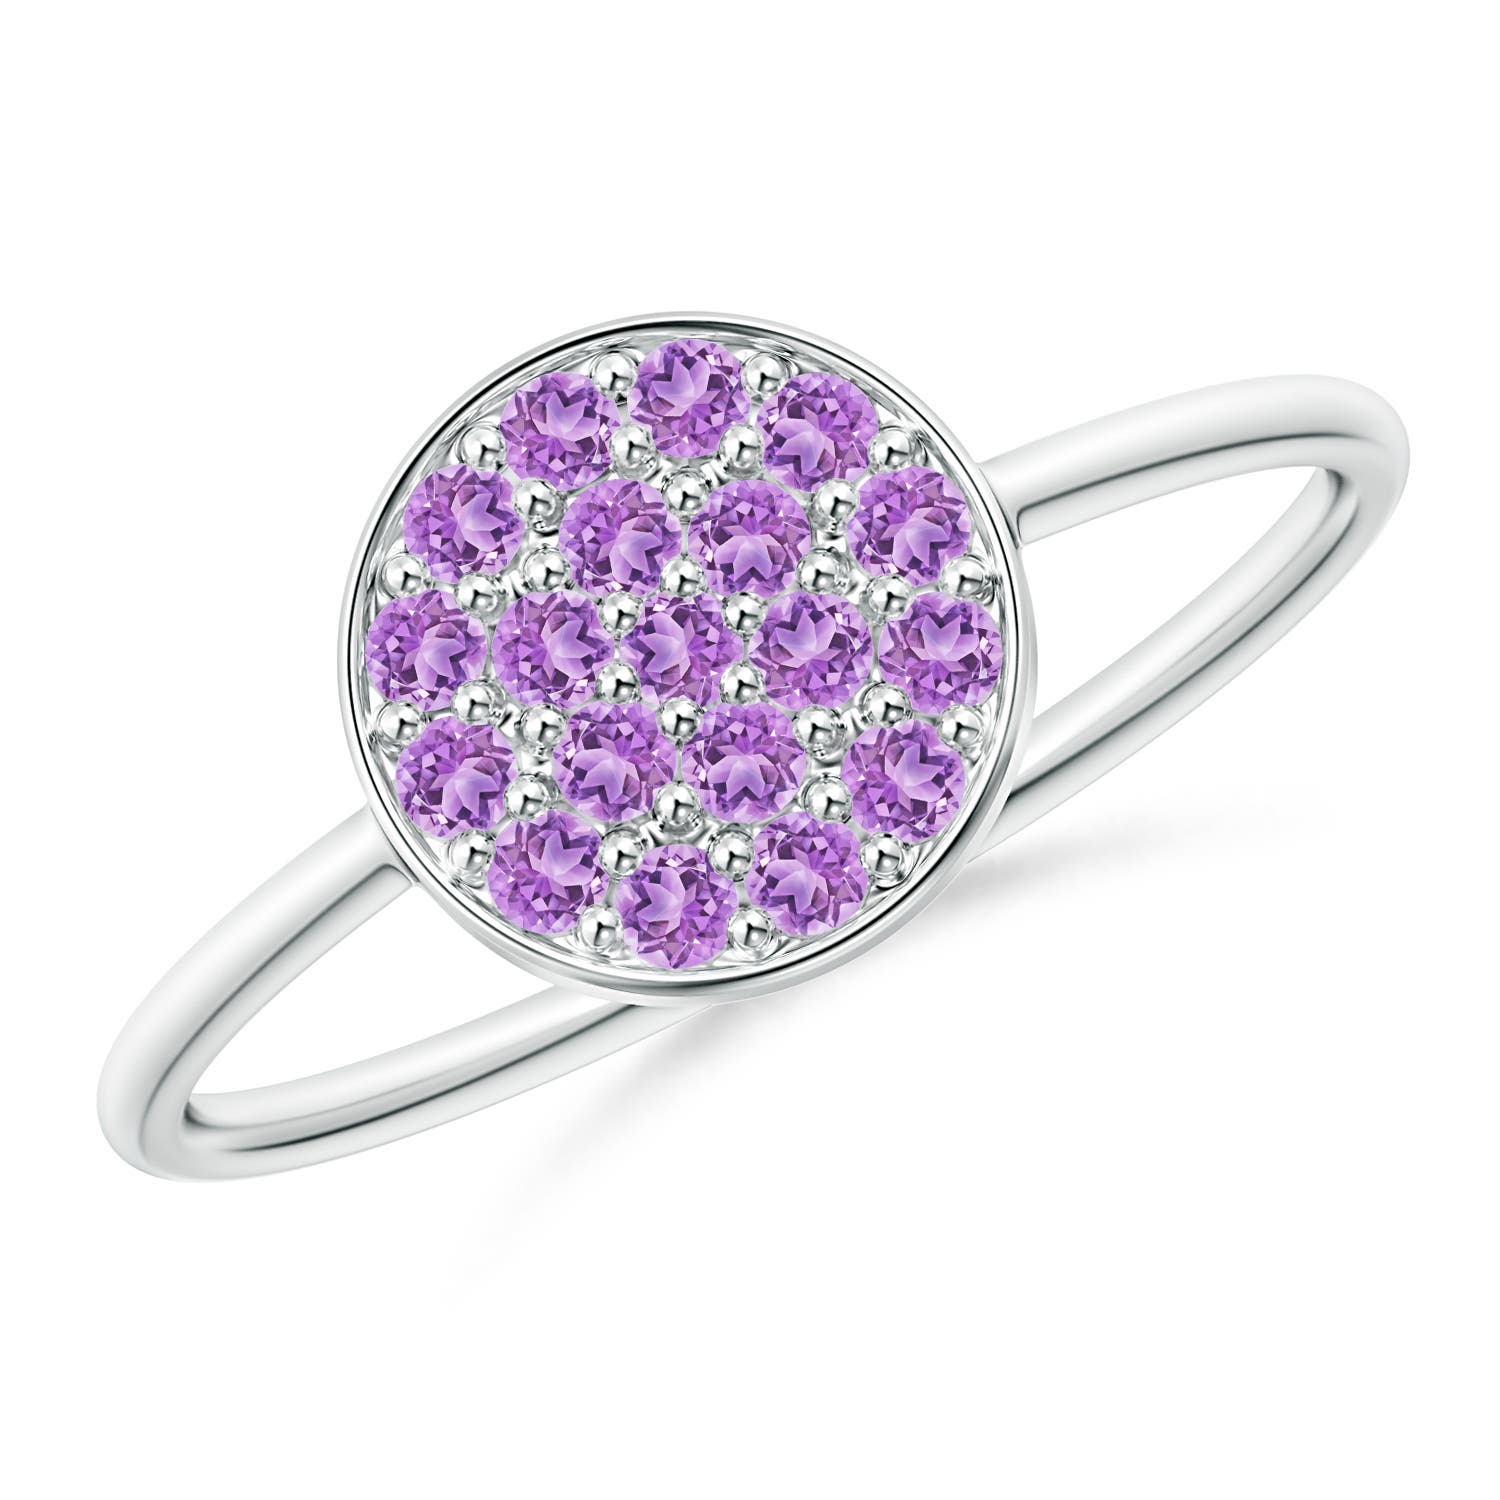 AAA - Amethyst / 0.27 CT / 14 KT White Gold